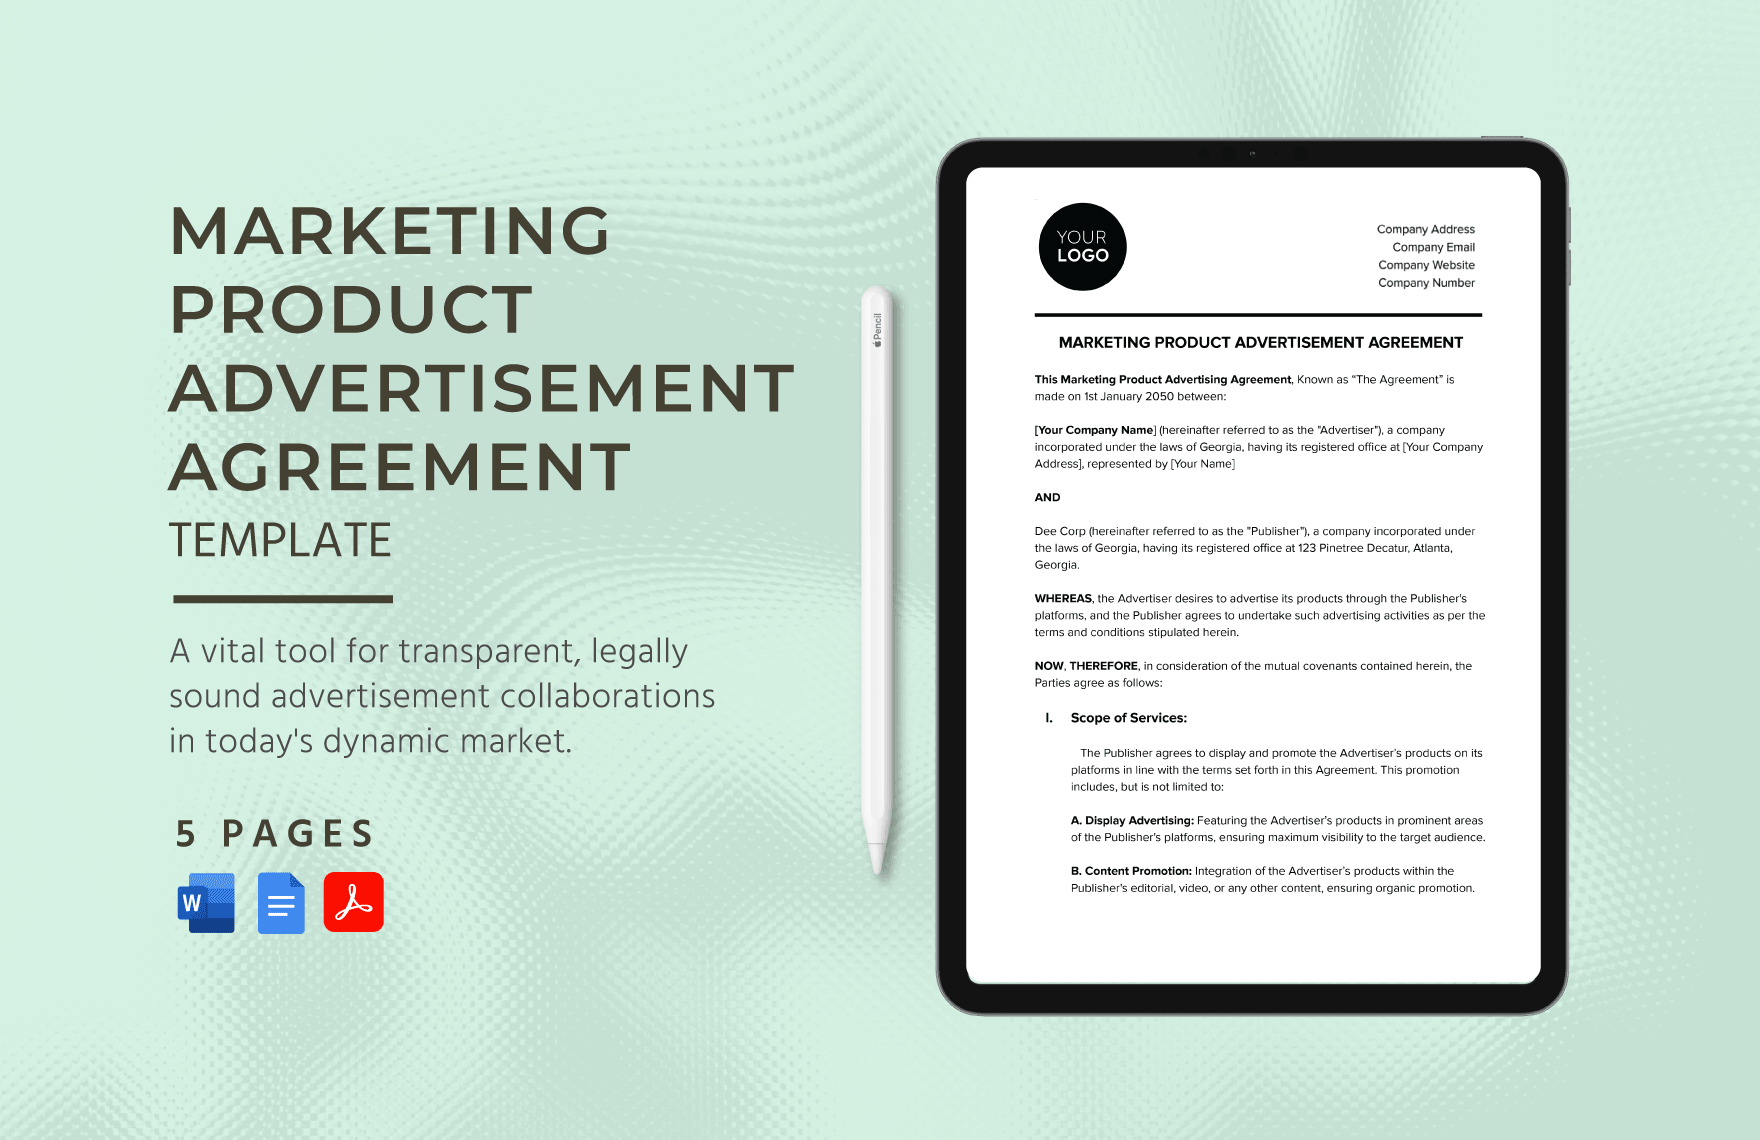 Marketing Product Advertisement Agreement Template in Word, Google Docs, PDF